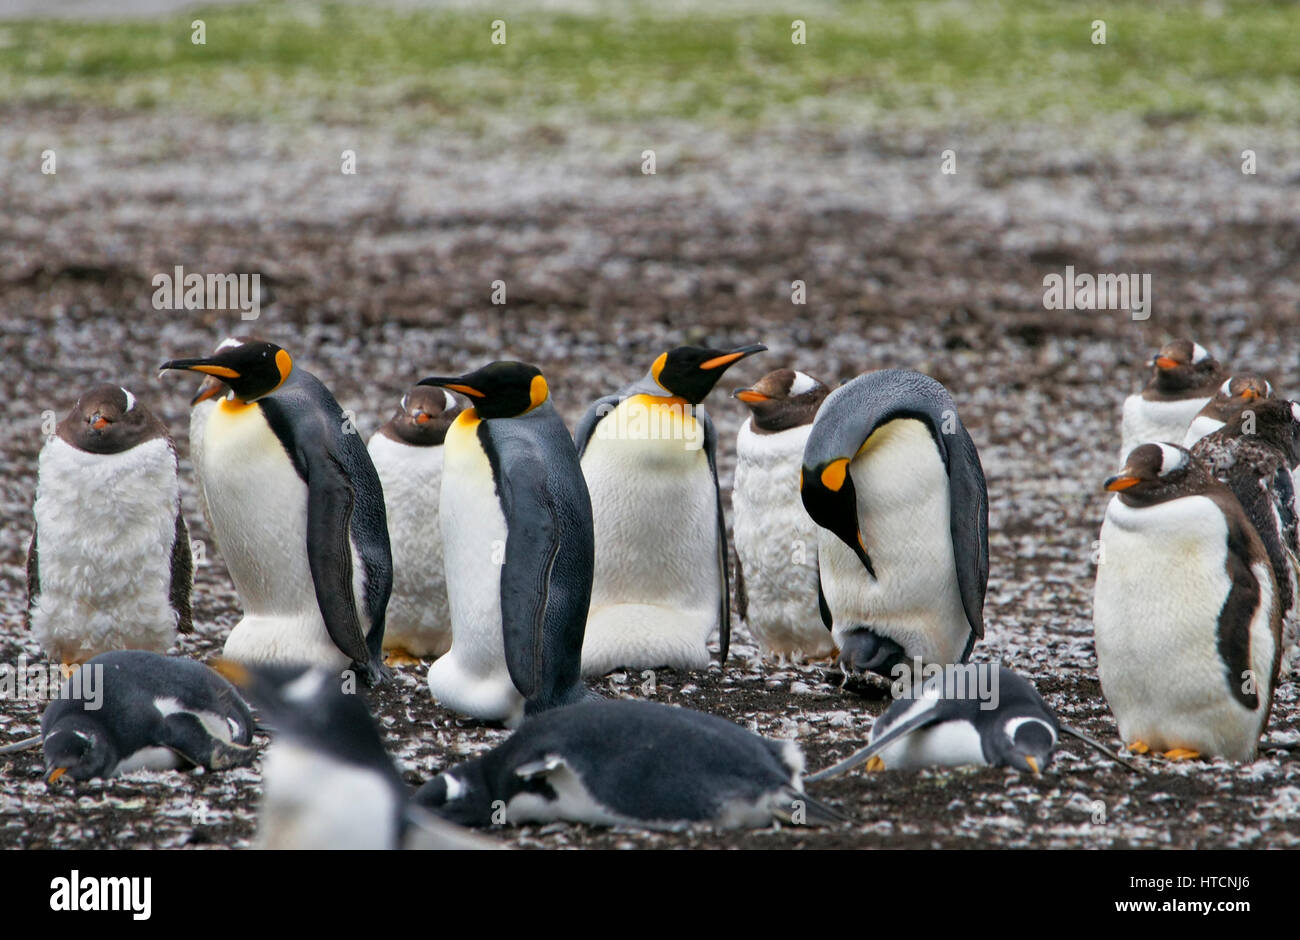 King penguins and smaller gentoo penguins in the Falkland Islands. The female King penguin on the right hangs her head down to check her chick. Stock Photo